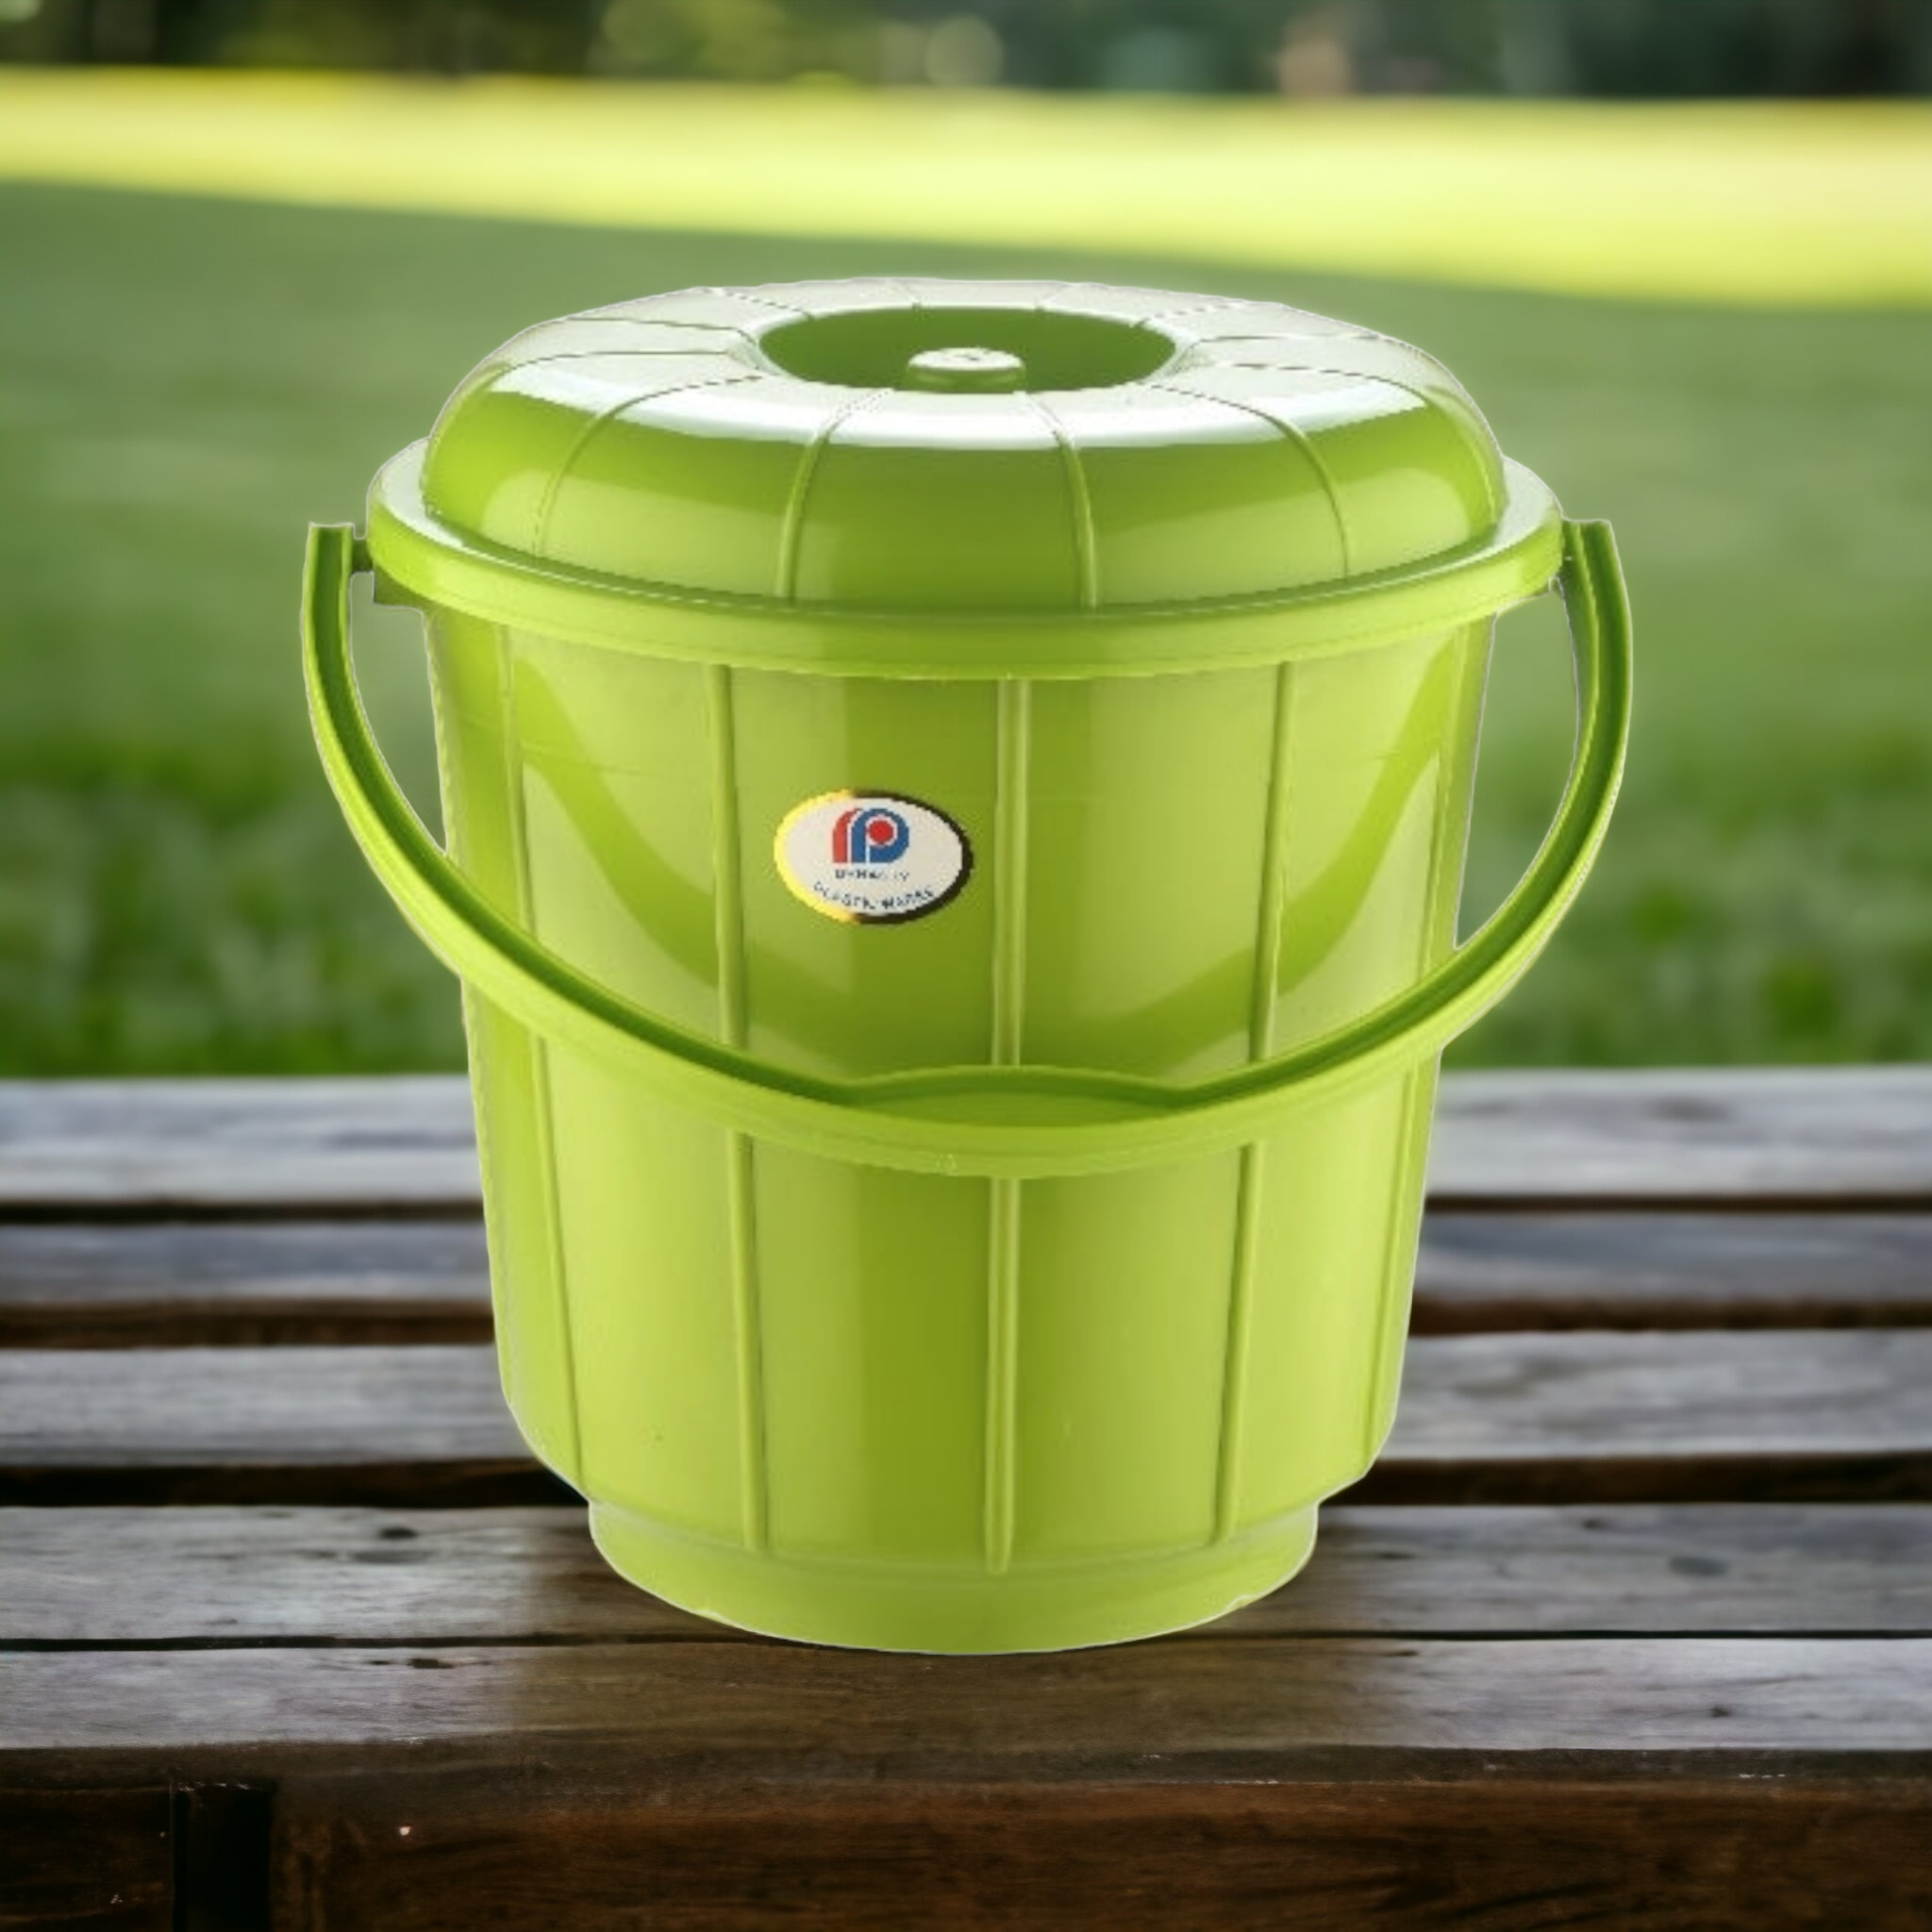 20L Plastic Bucket with Lid 120WLPH